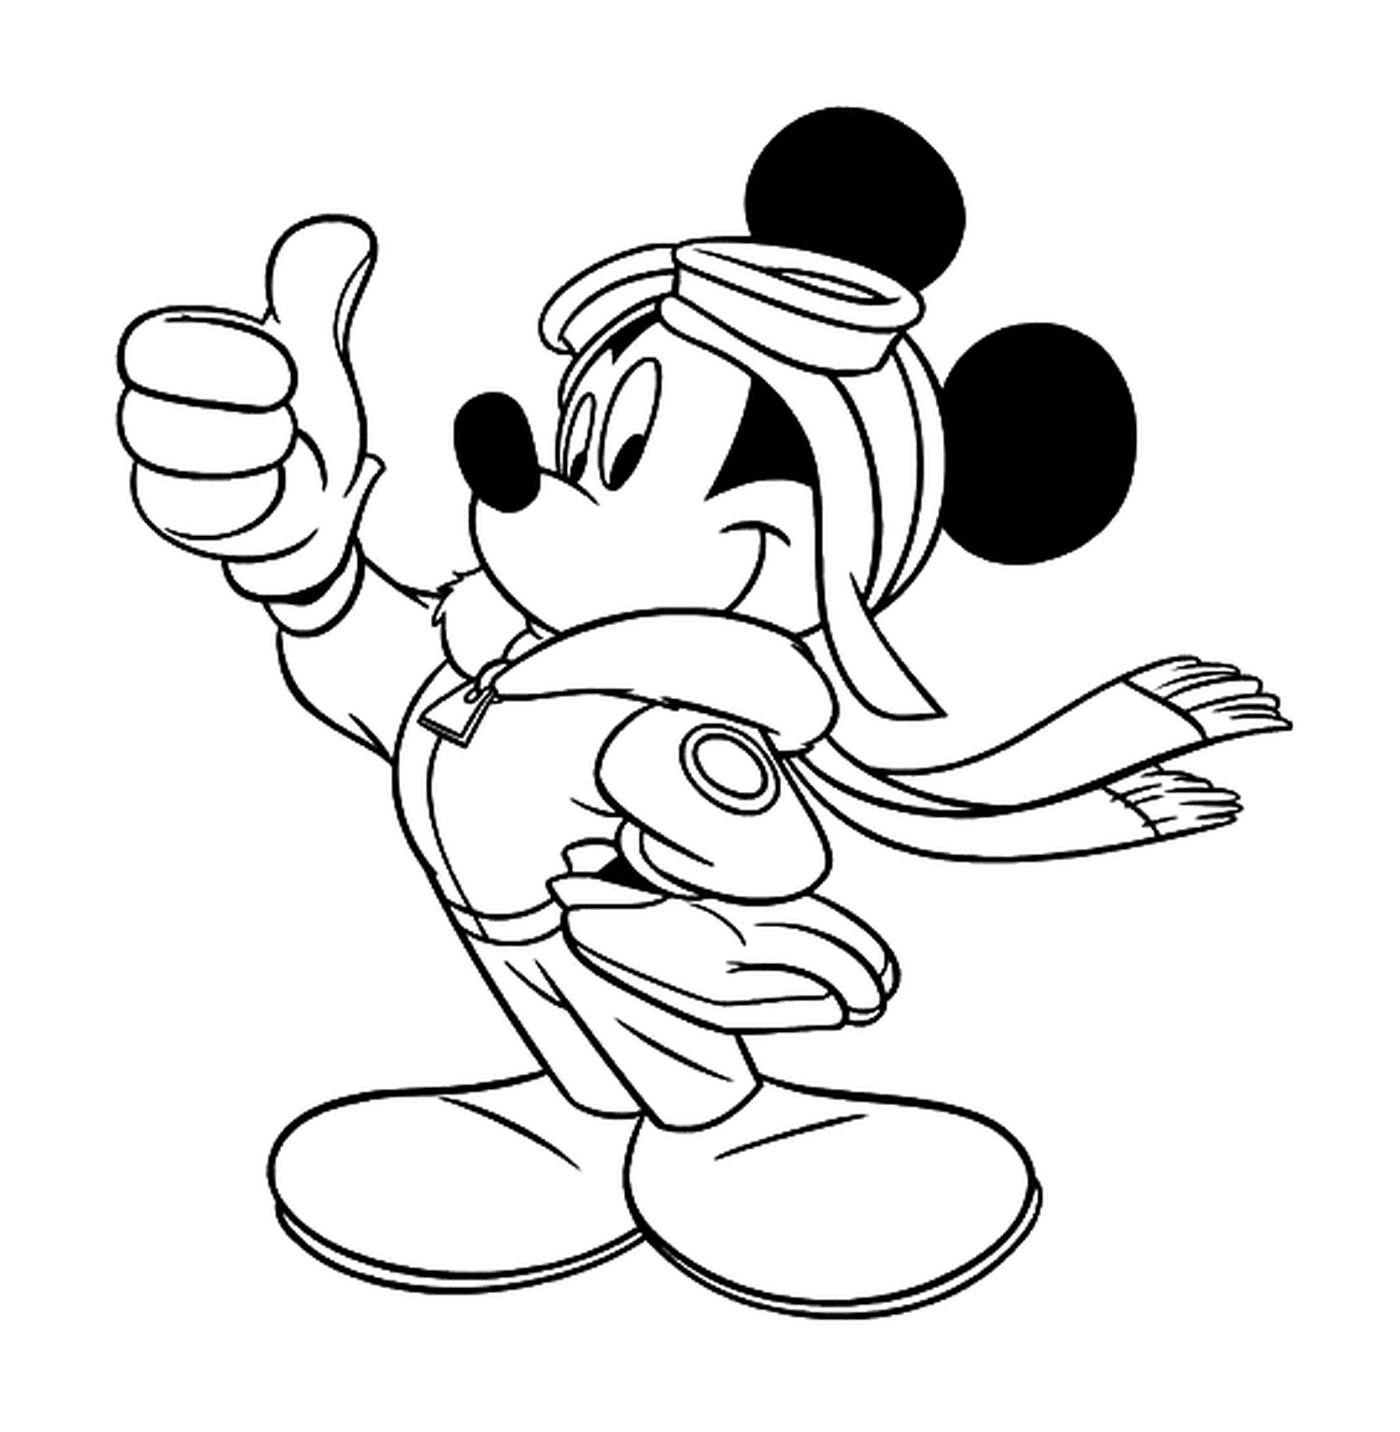  Mickey the aviator: making an inch up 